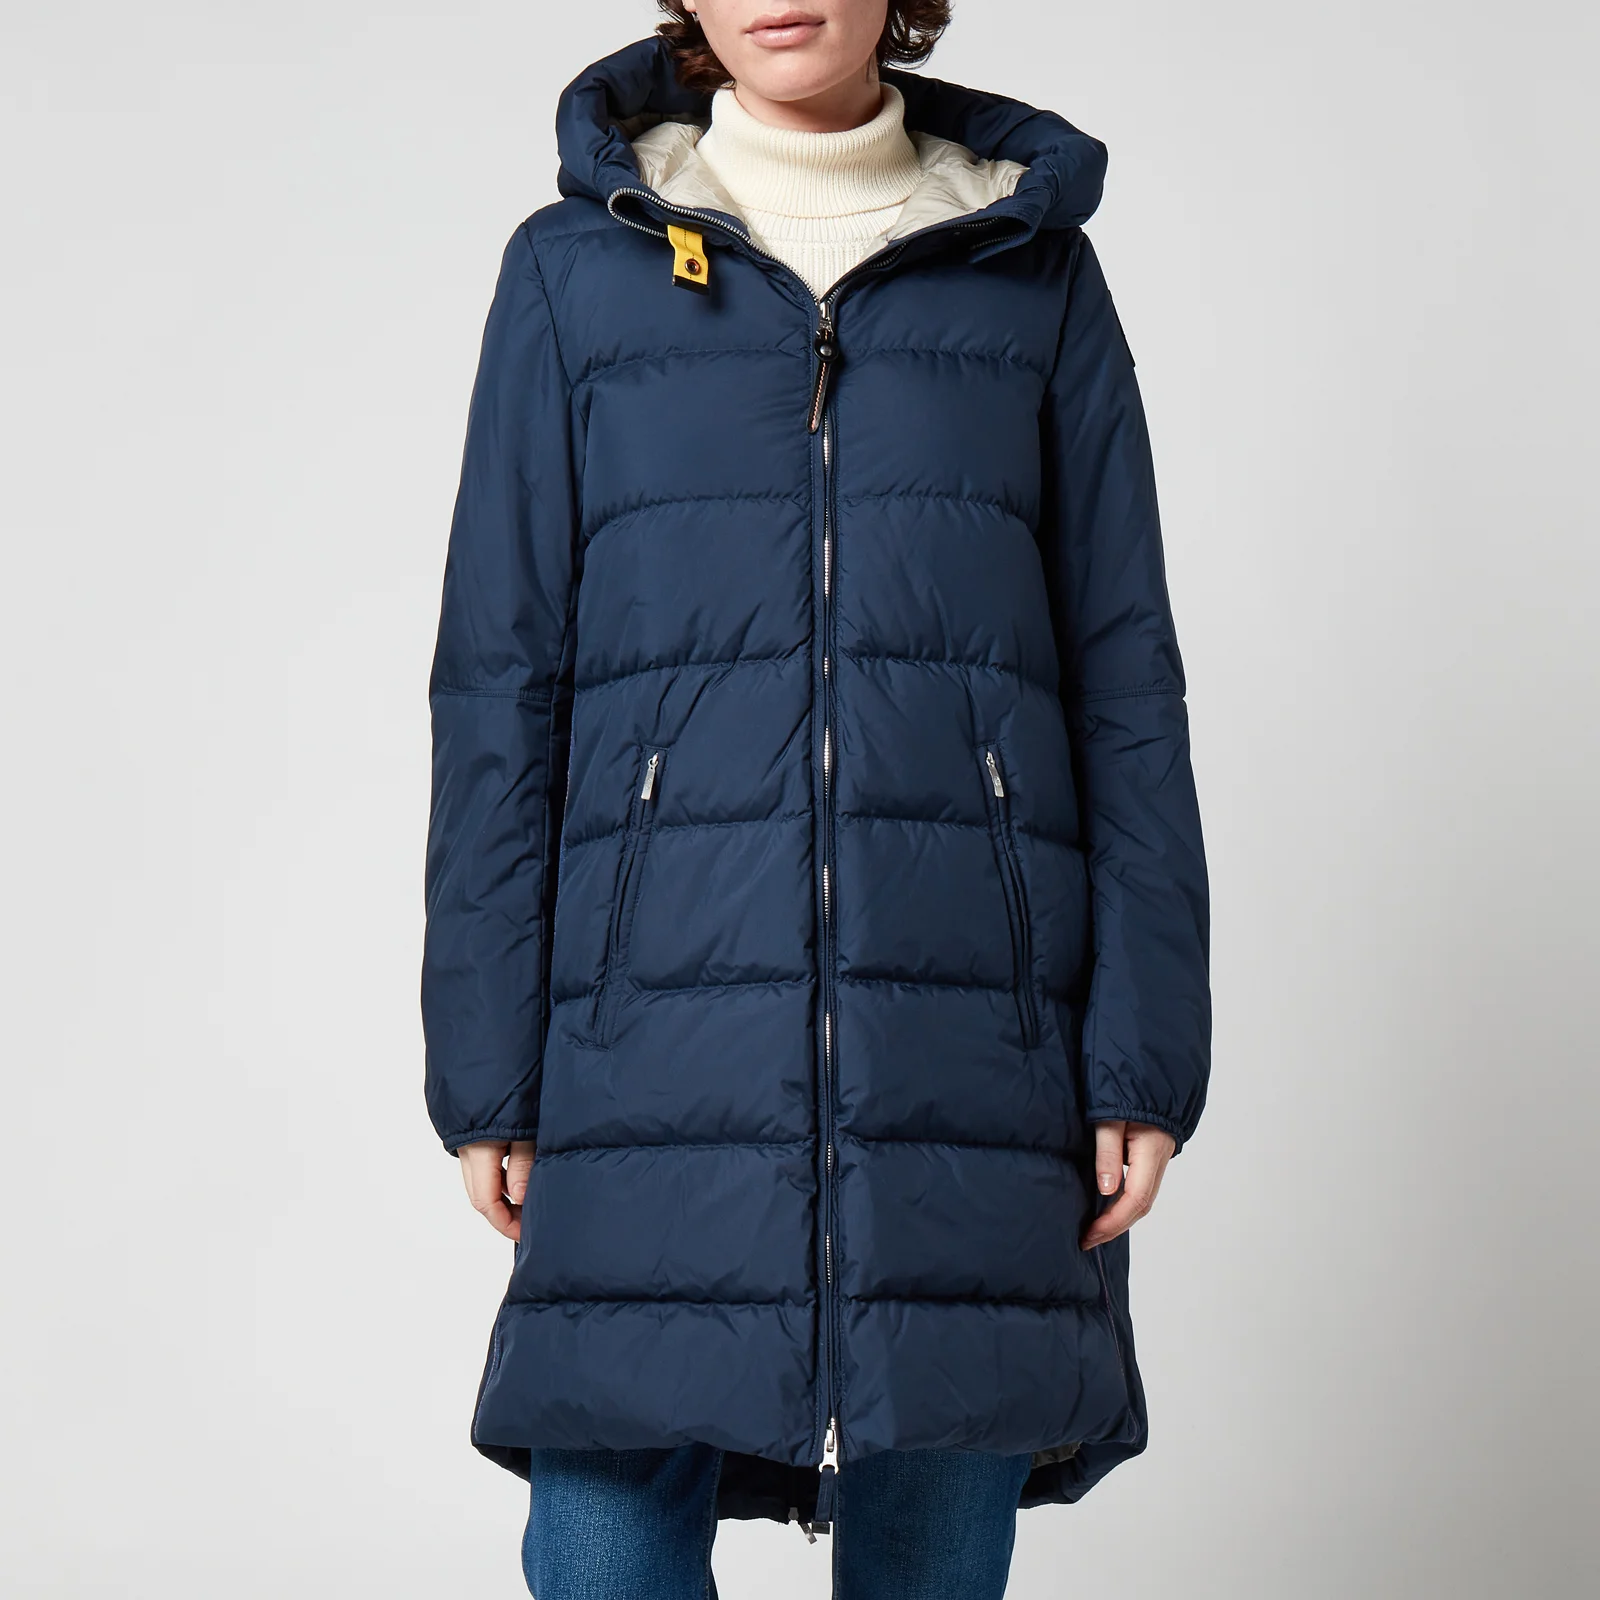 Parajumpers Women's Tracie Coat - Navy Image 1